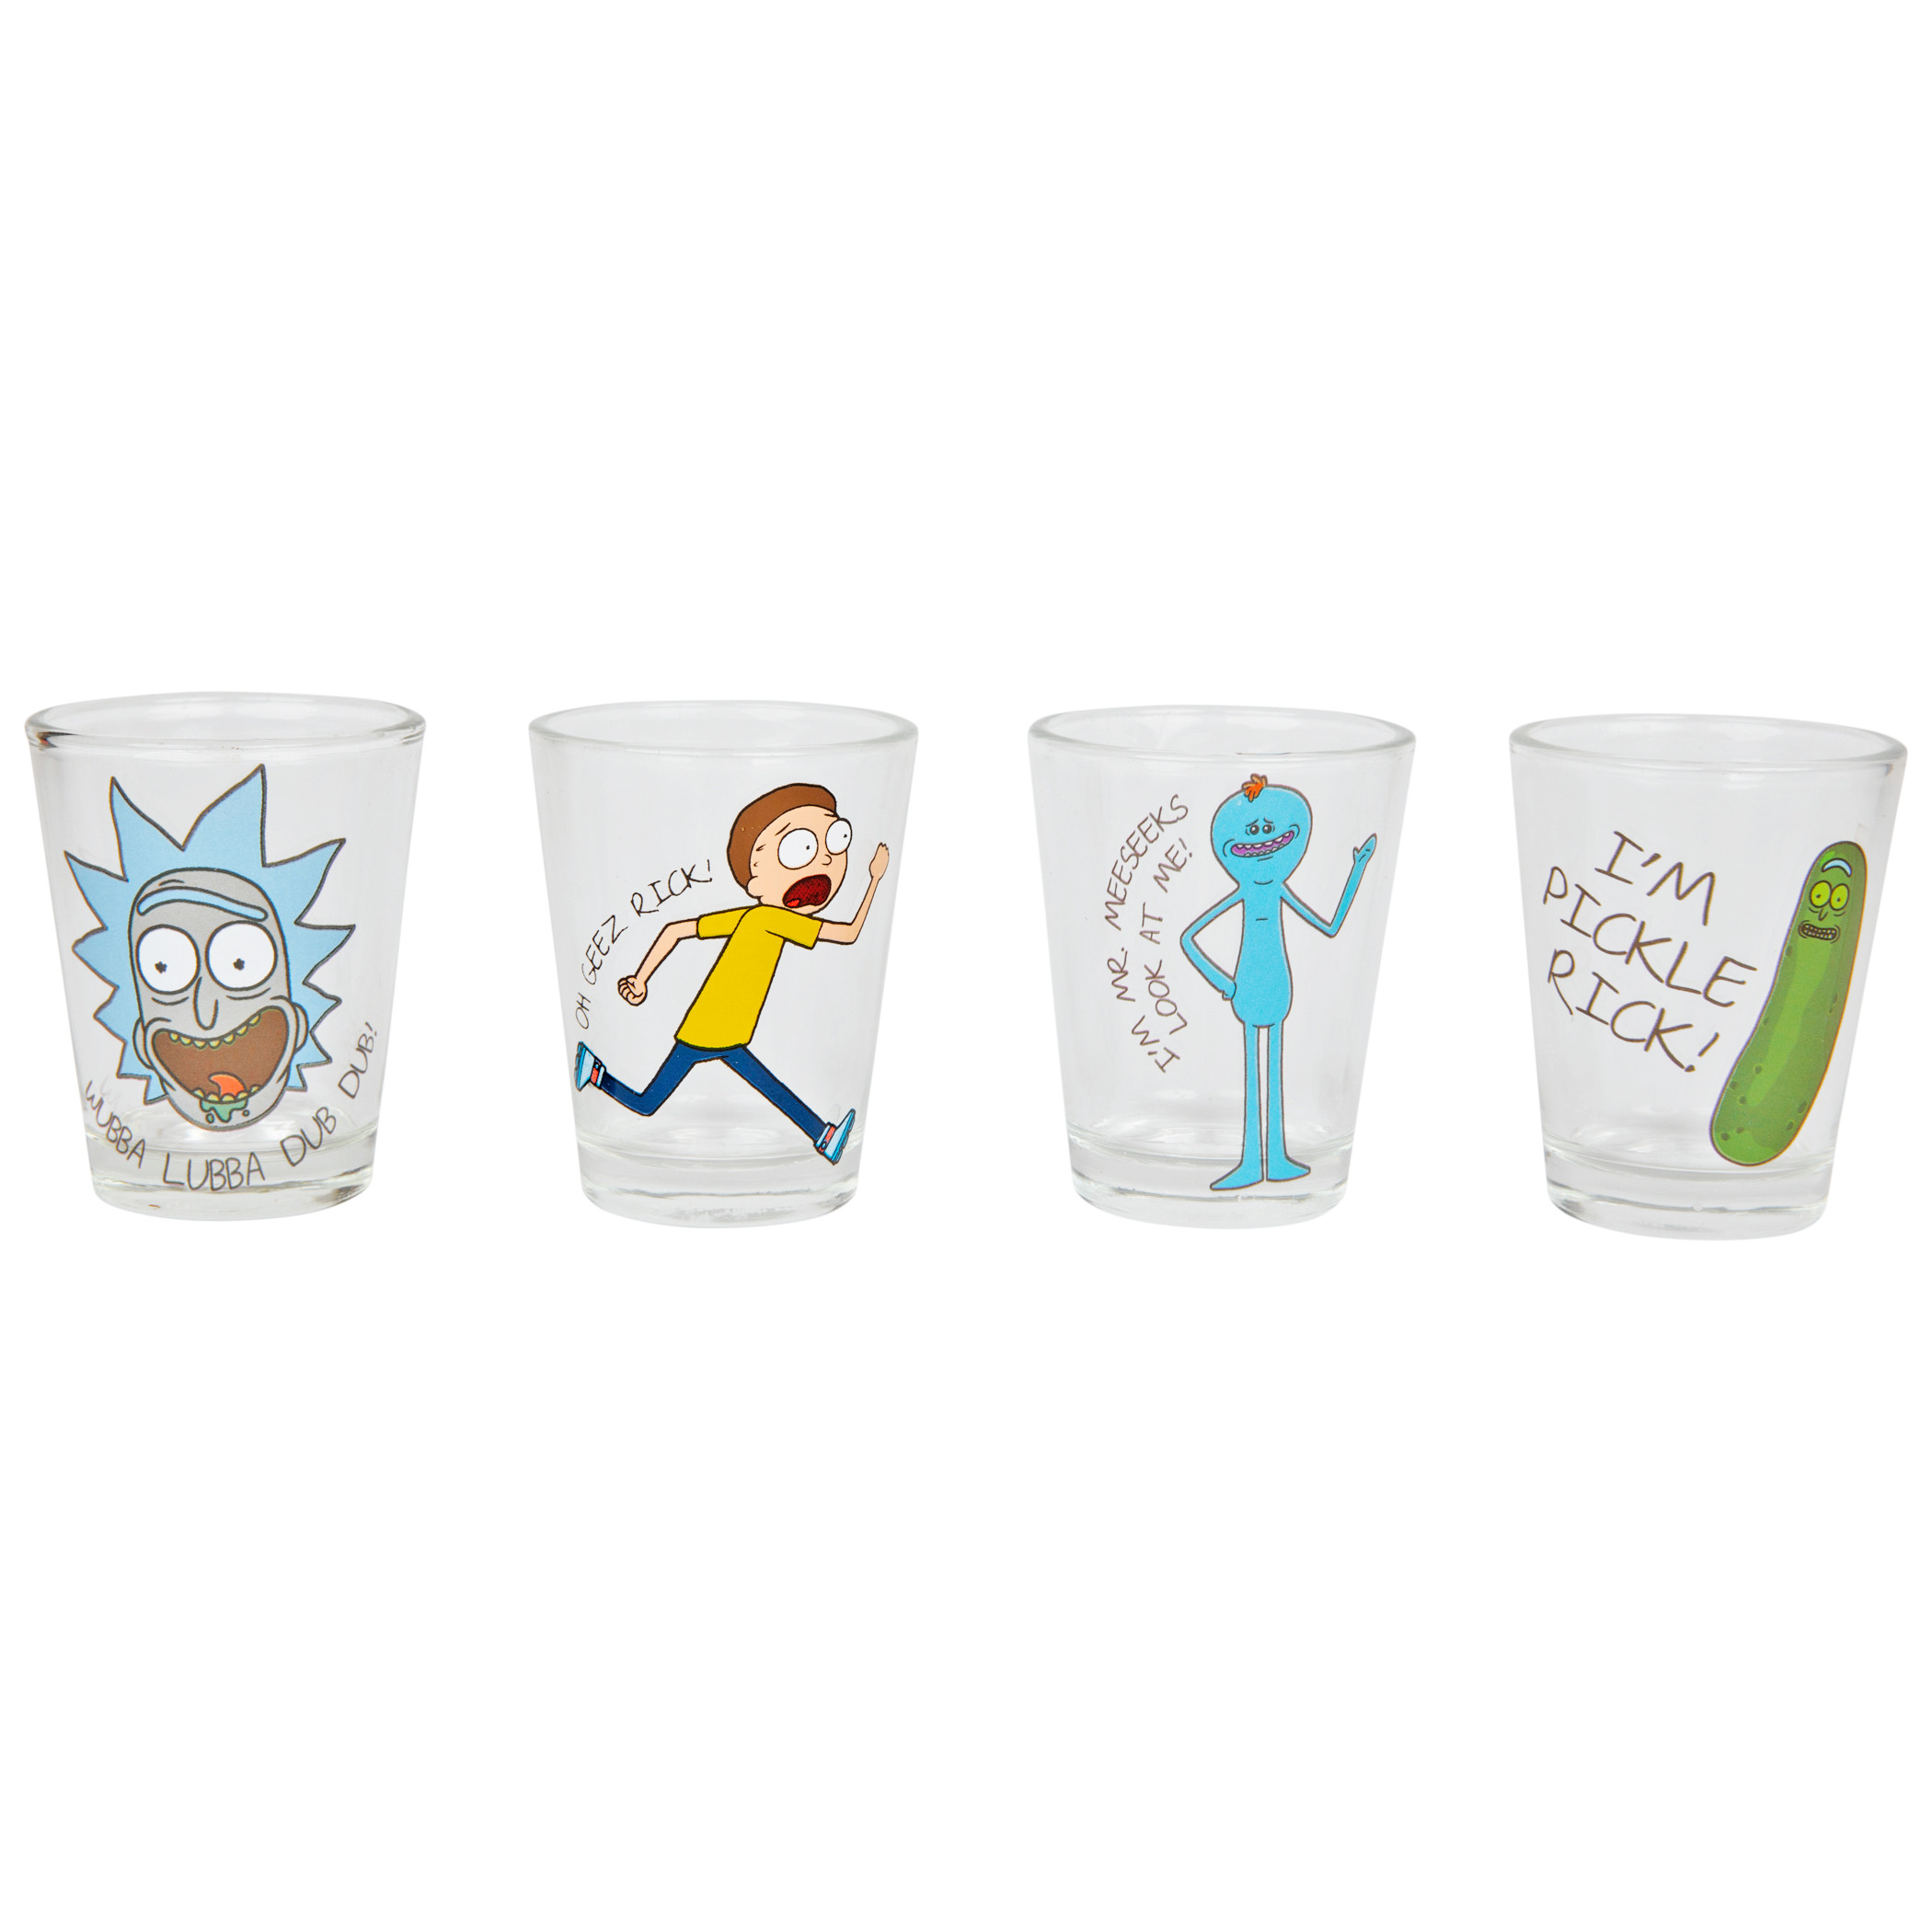 Rick and Morty Character Phrases 4-Pack Shot Glass Set